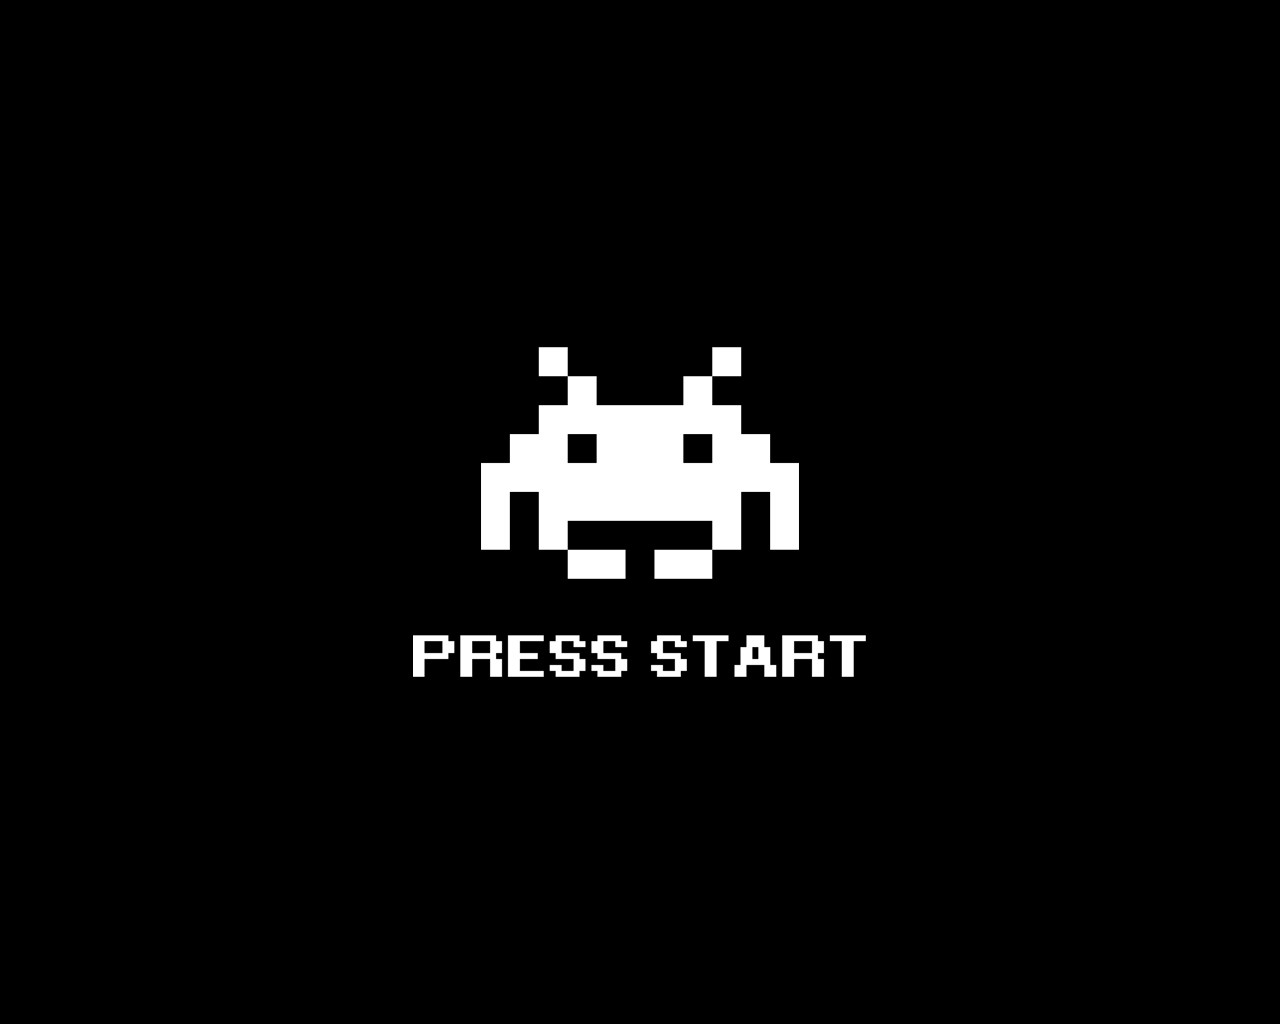 Space Invaders Video Games Retro Games Video Game Art Simple Background Minimalism Monochrome 1280x1024